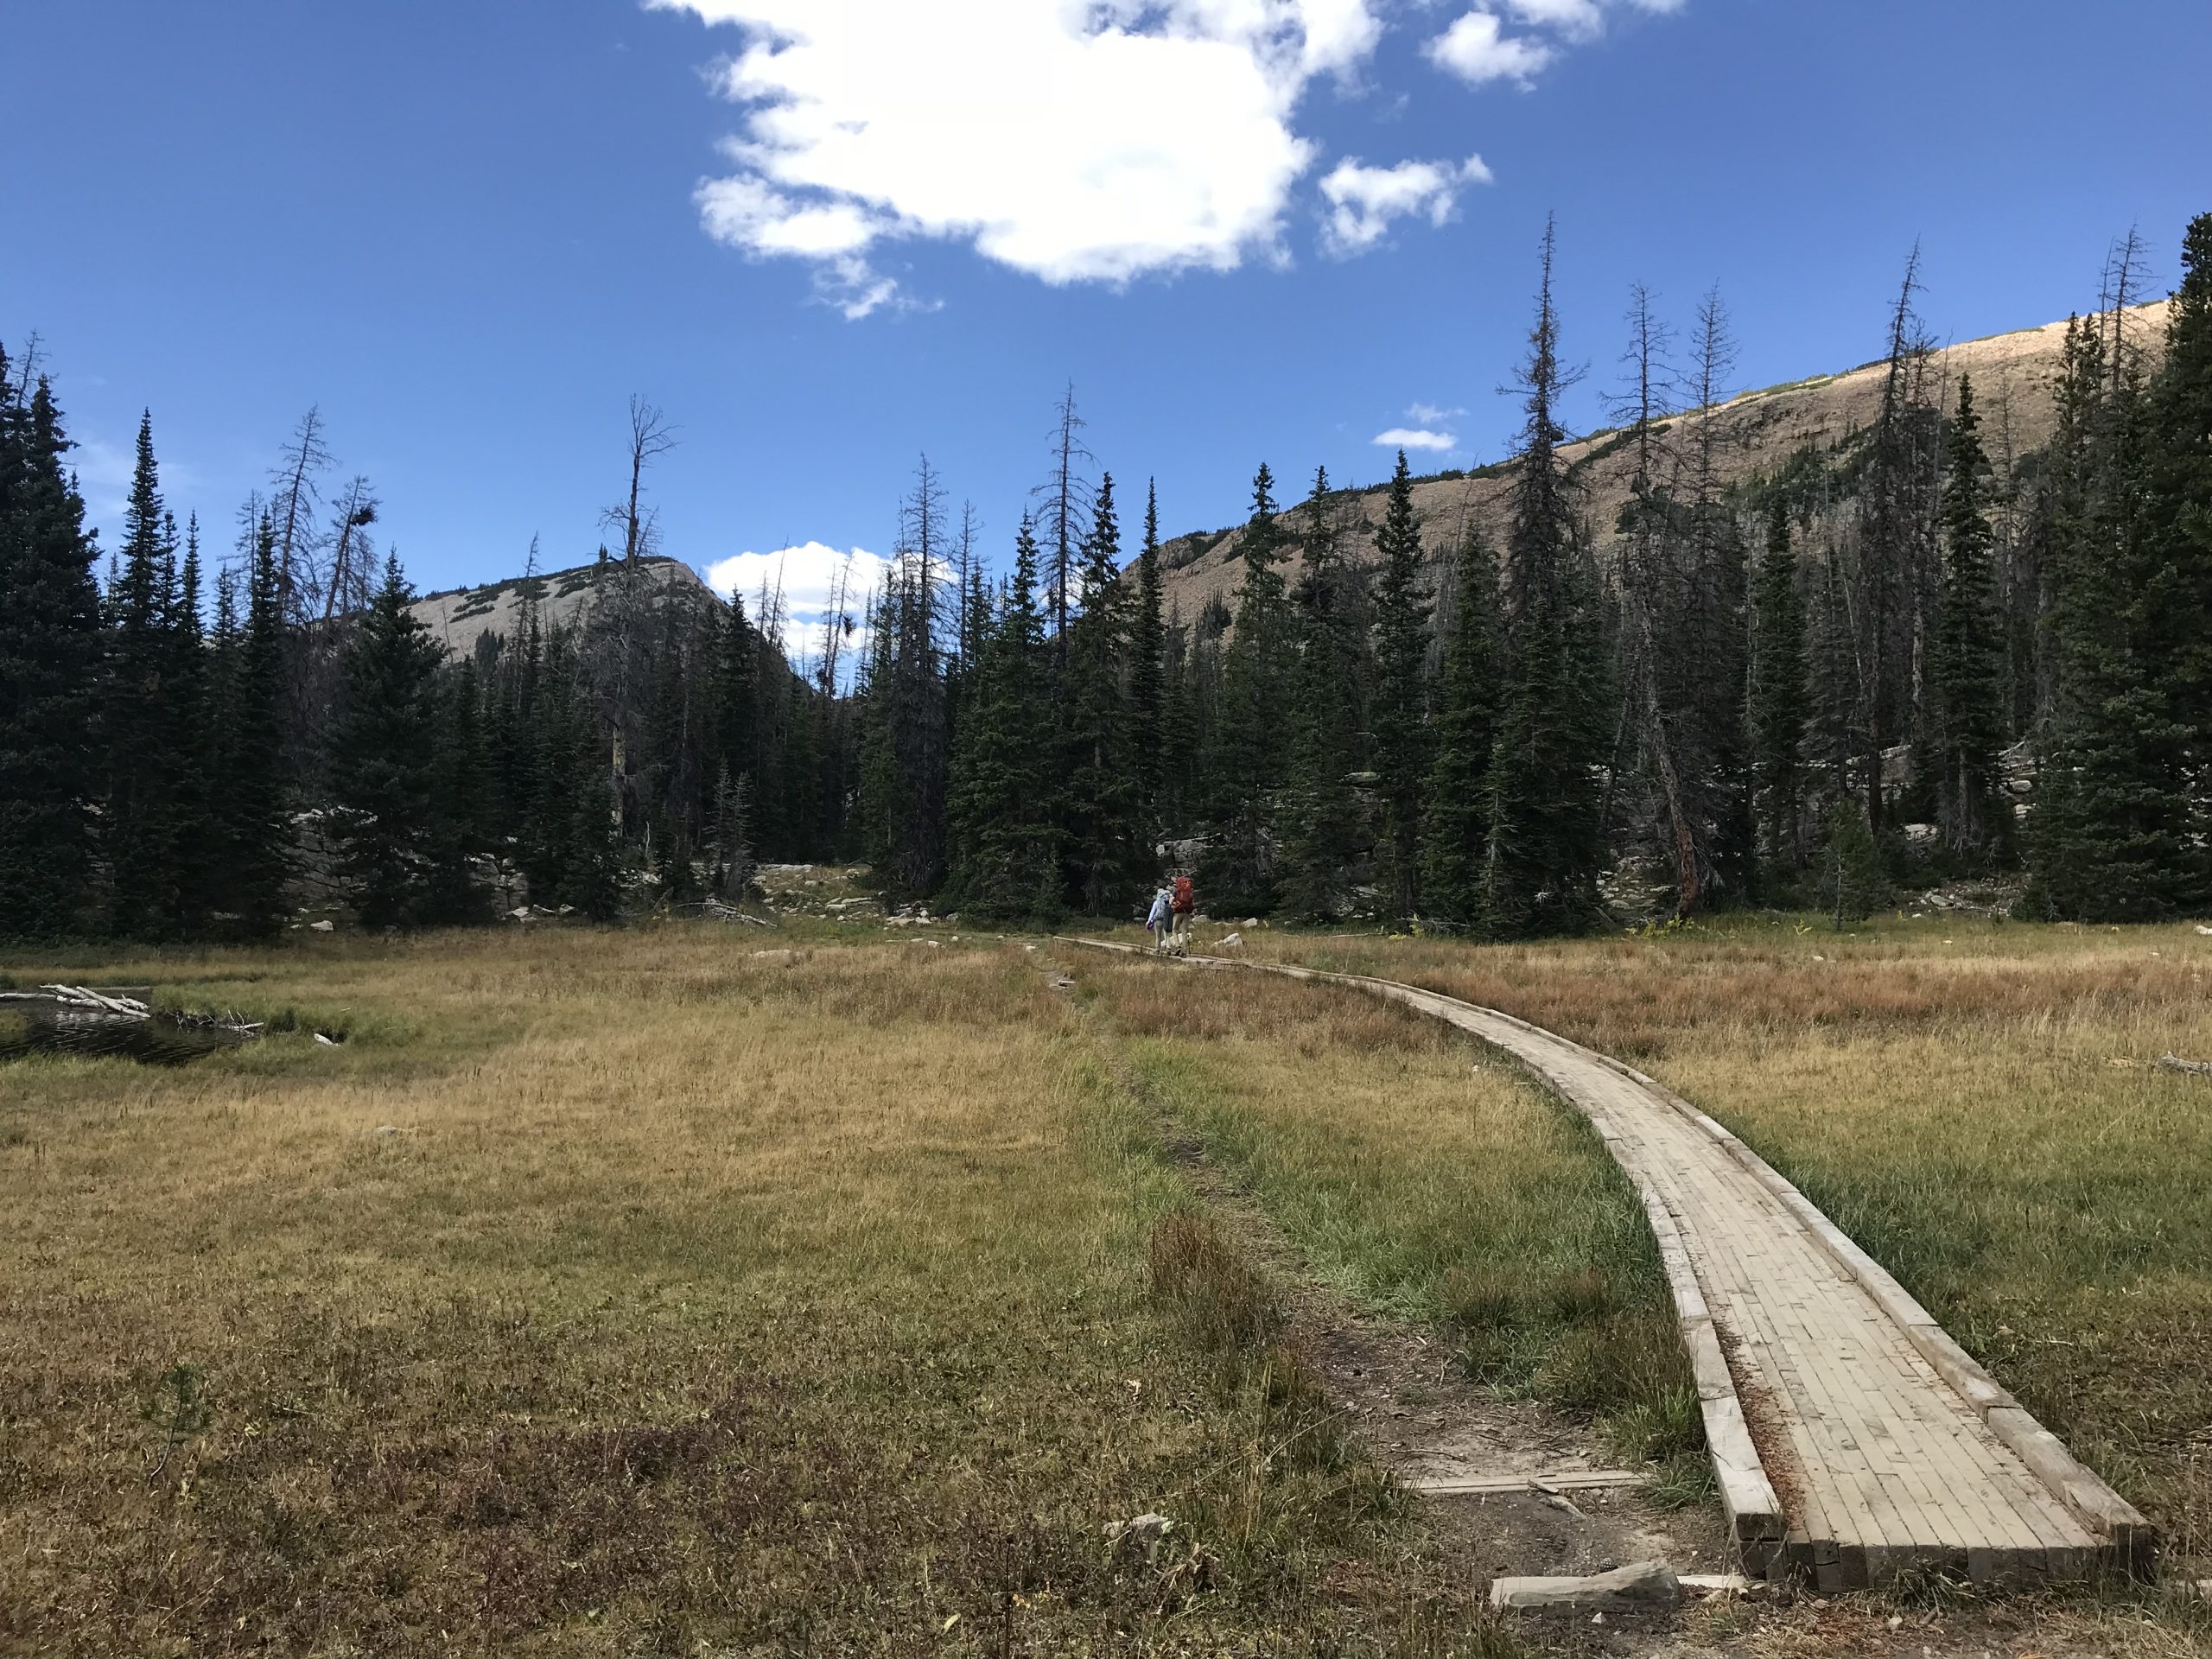 Wooden hiking path in Uintah utah by a field and pine trees